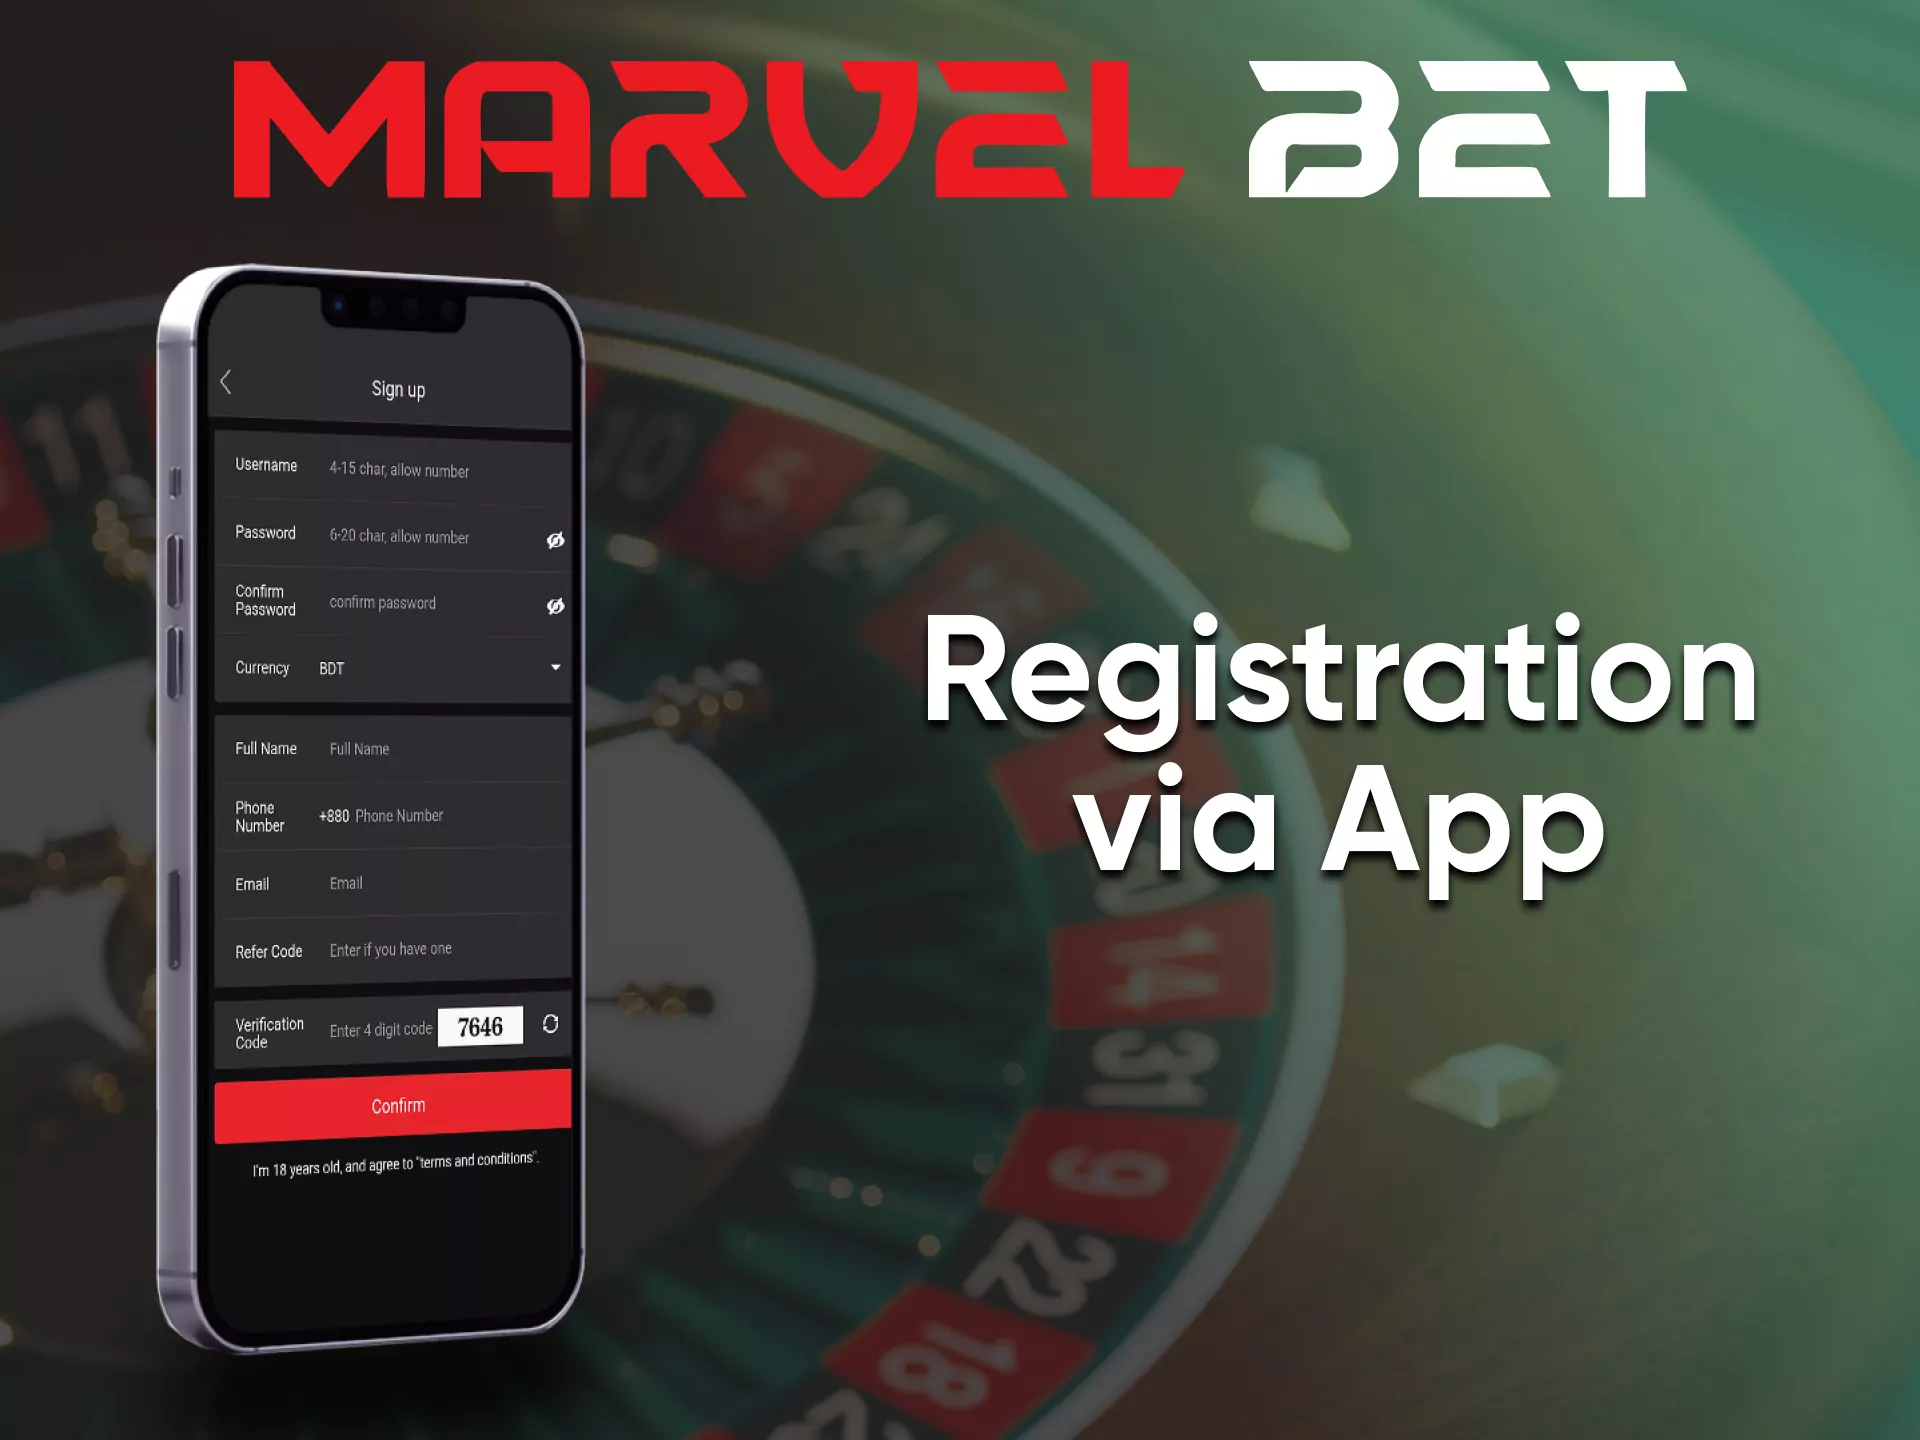 Sign up to play at Marvelbet casino.